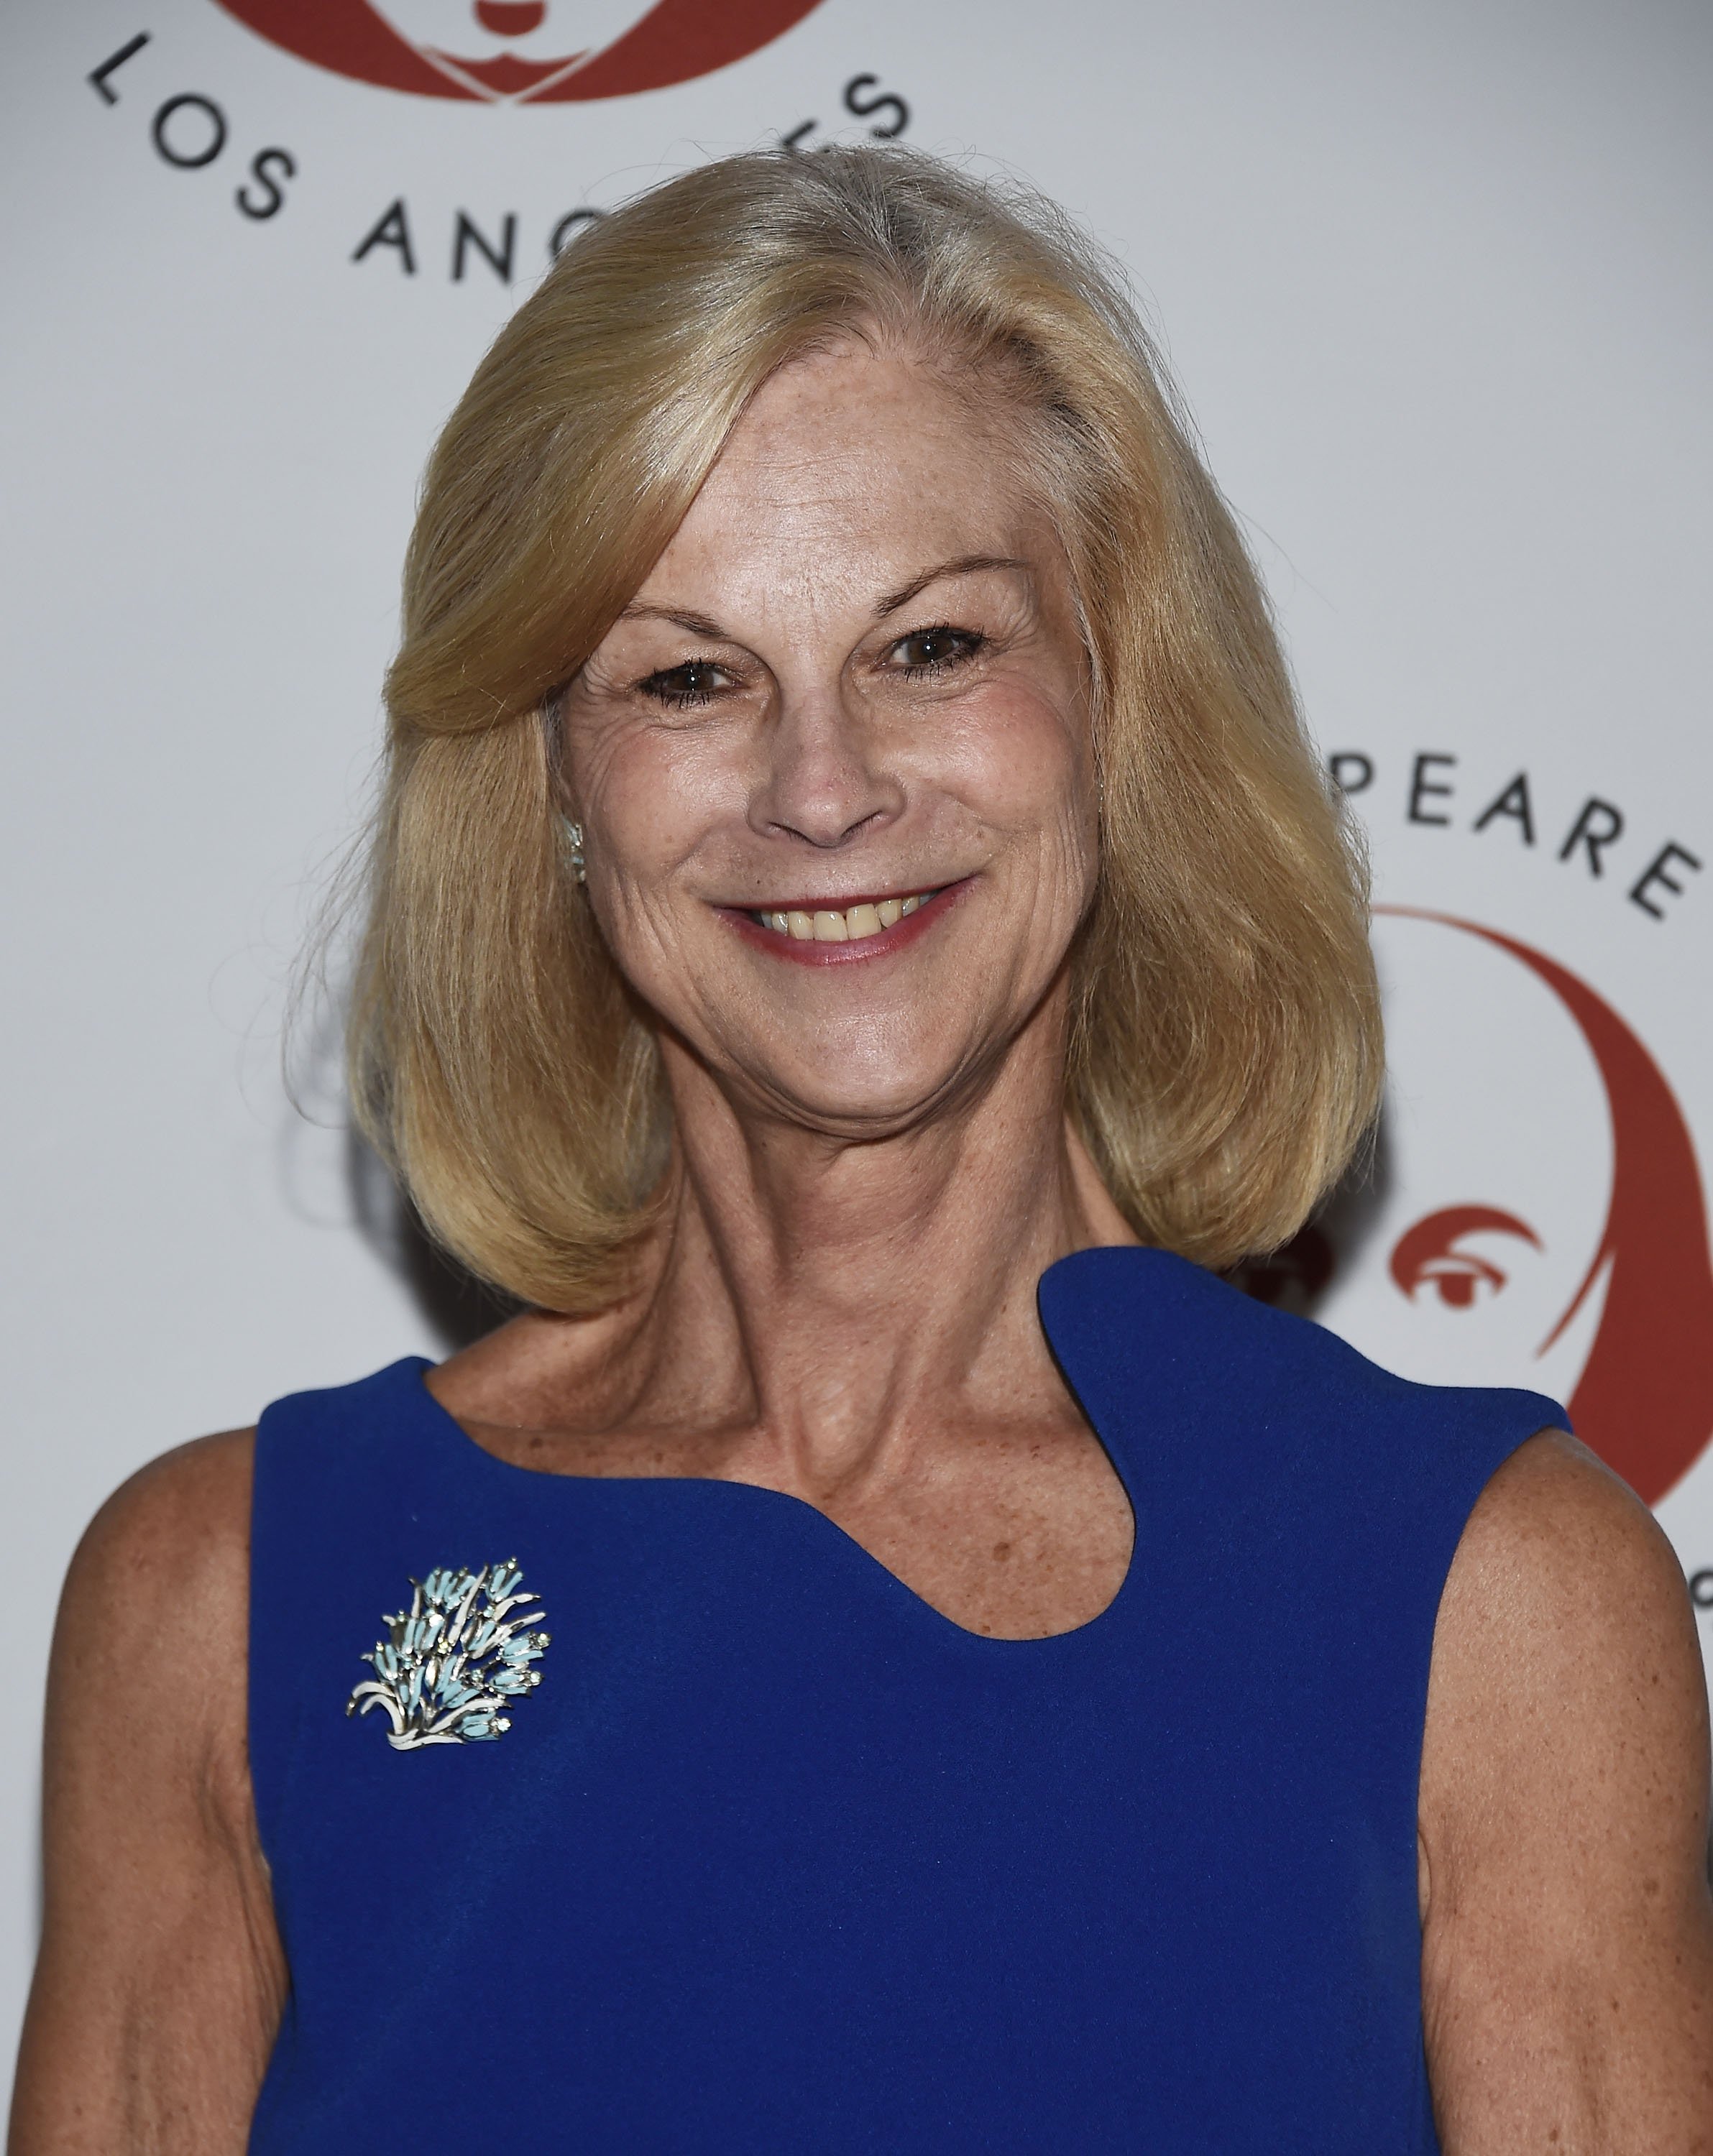 Christie Hefner is photographed as she arrives at the 27th Annual Simply Shakespeare benefit on September 18, 2017, in Westwood. | Source: Getty Images